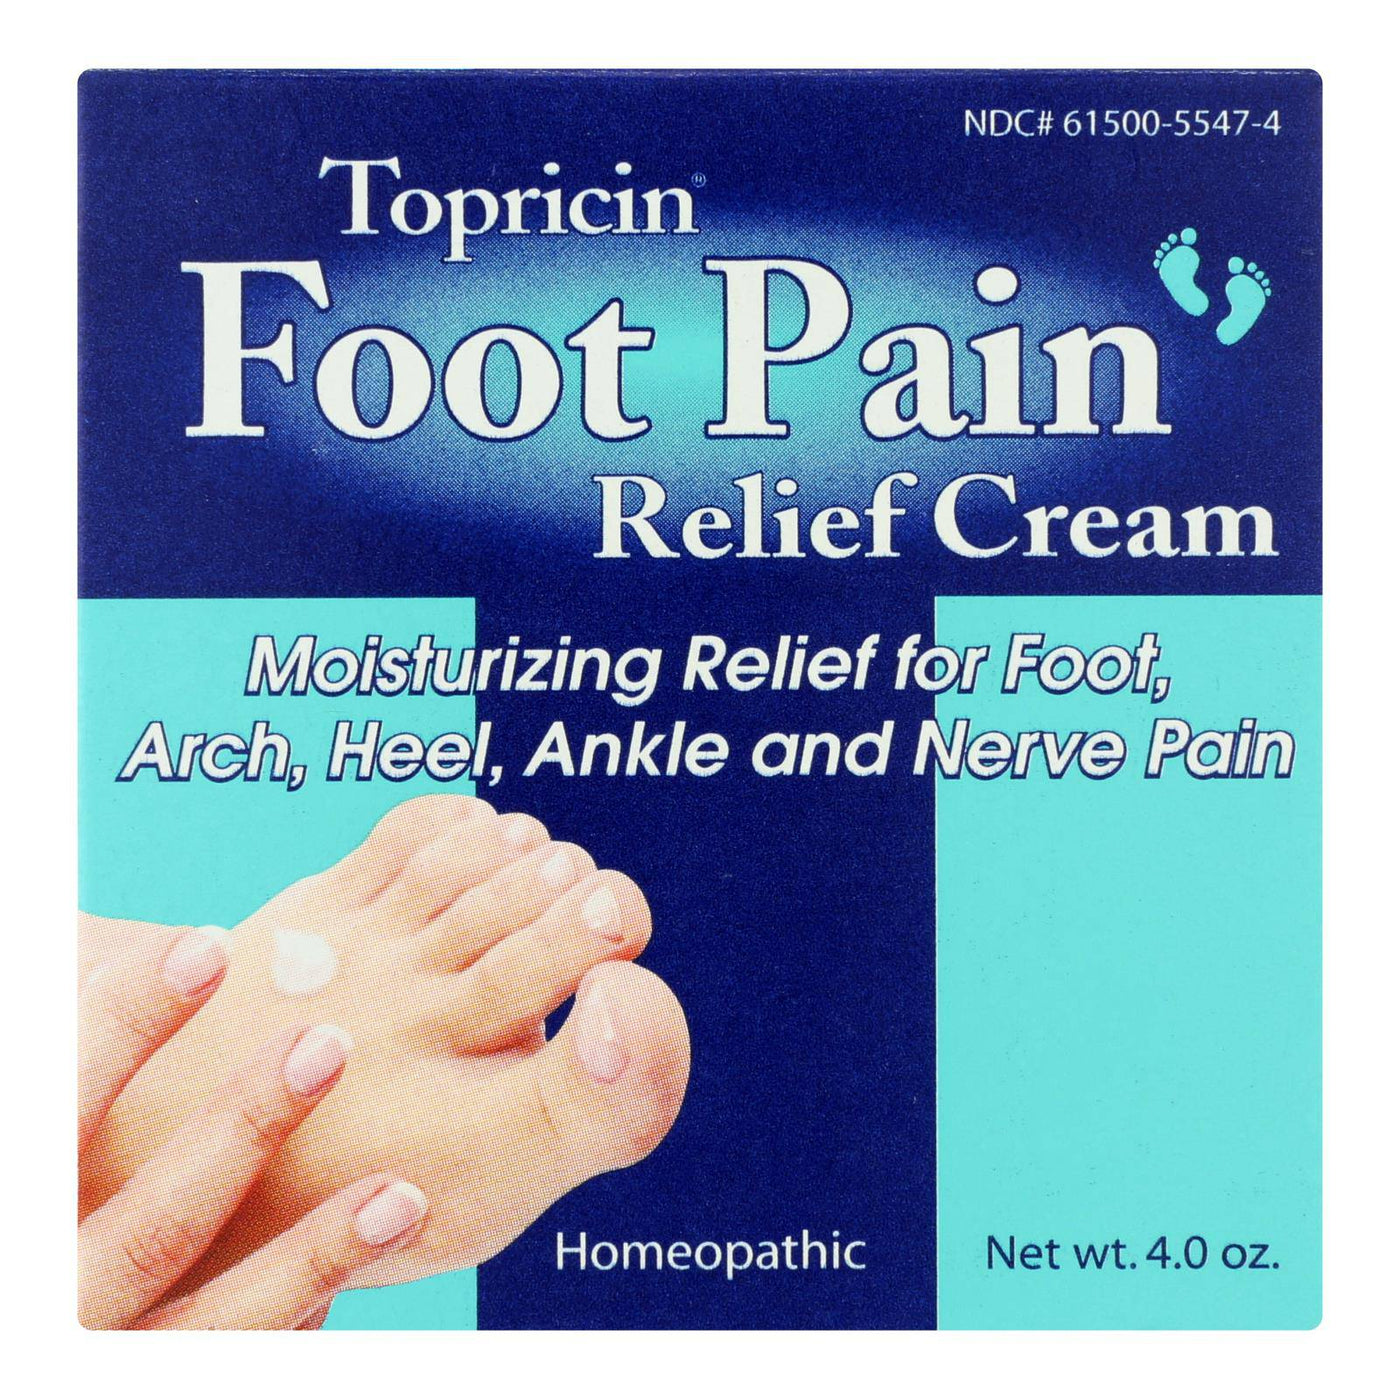 Buy Topricin Foot Therapy - 4 Oz  at OnlyNaturals.us